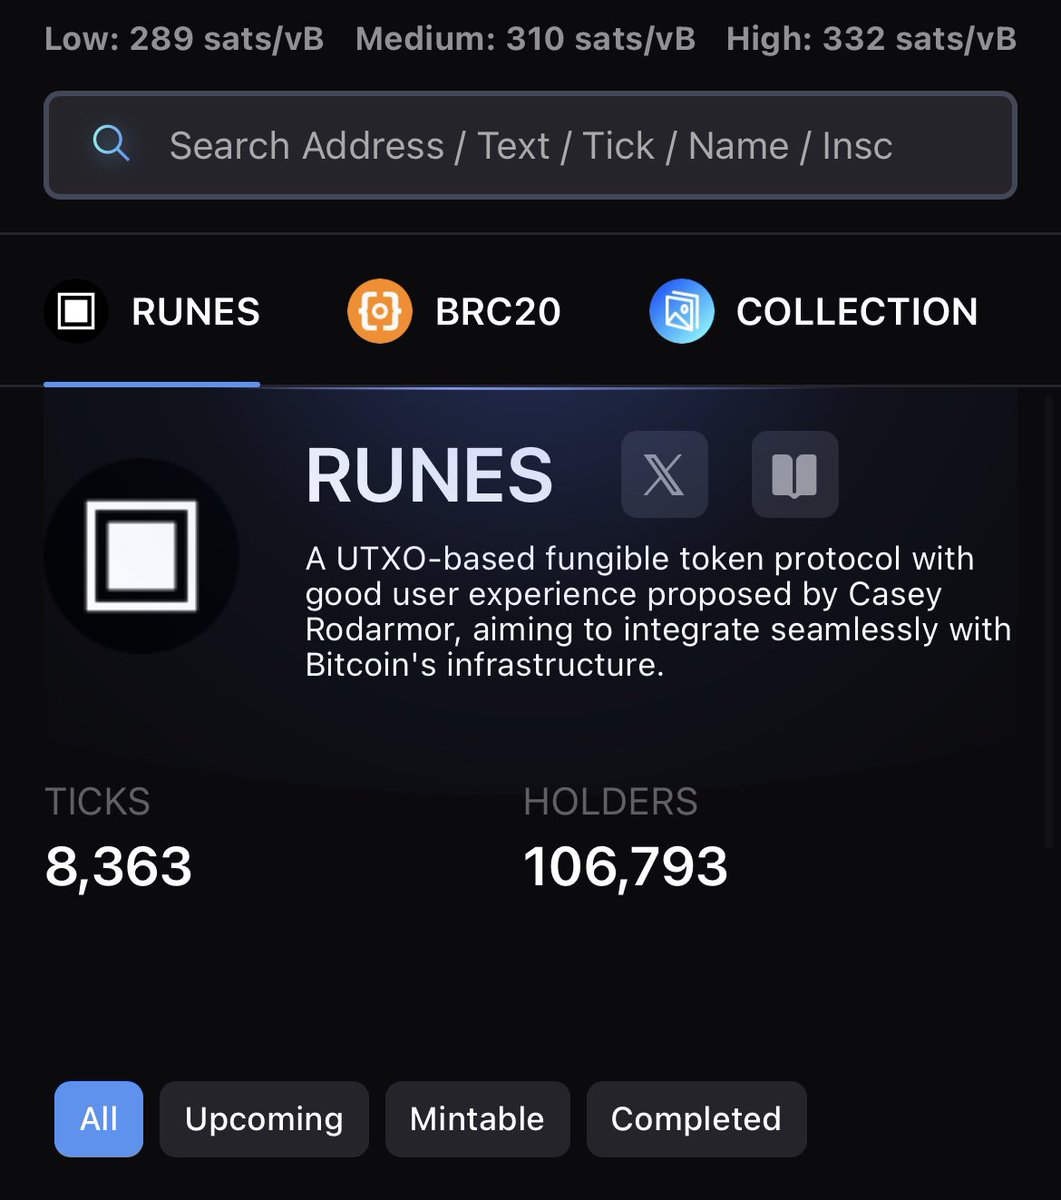 A quick overview of the statistics for Runes, which launched at the beginning of April 20th, has been astounding! The Sats/vb continue to stay extremely high, while the number of holders soars. What is the lowest etch number you’ve managed to obtain since the launch of Runes?